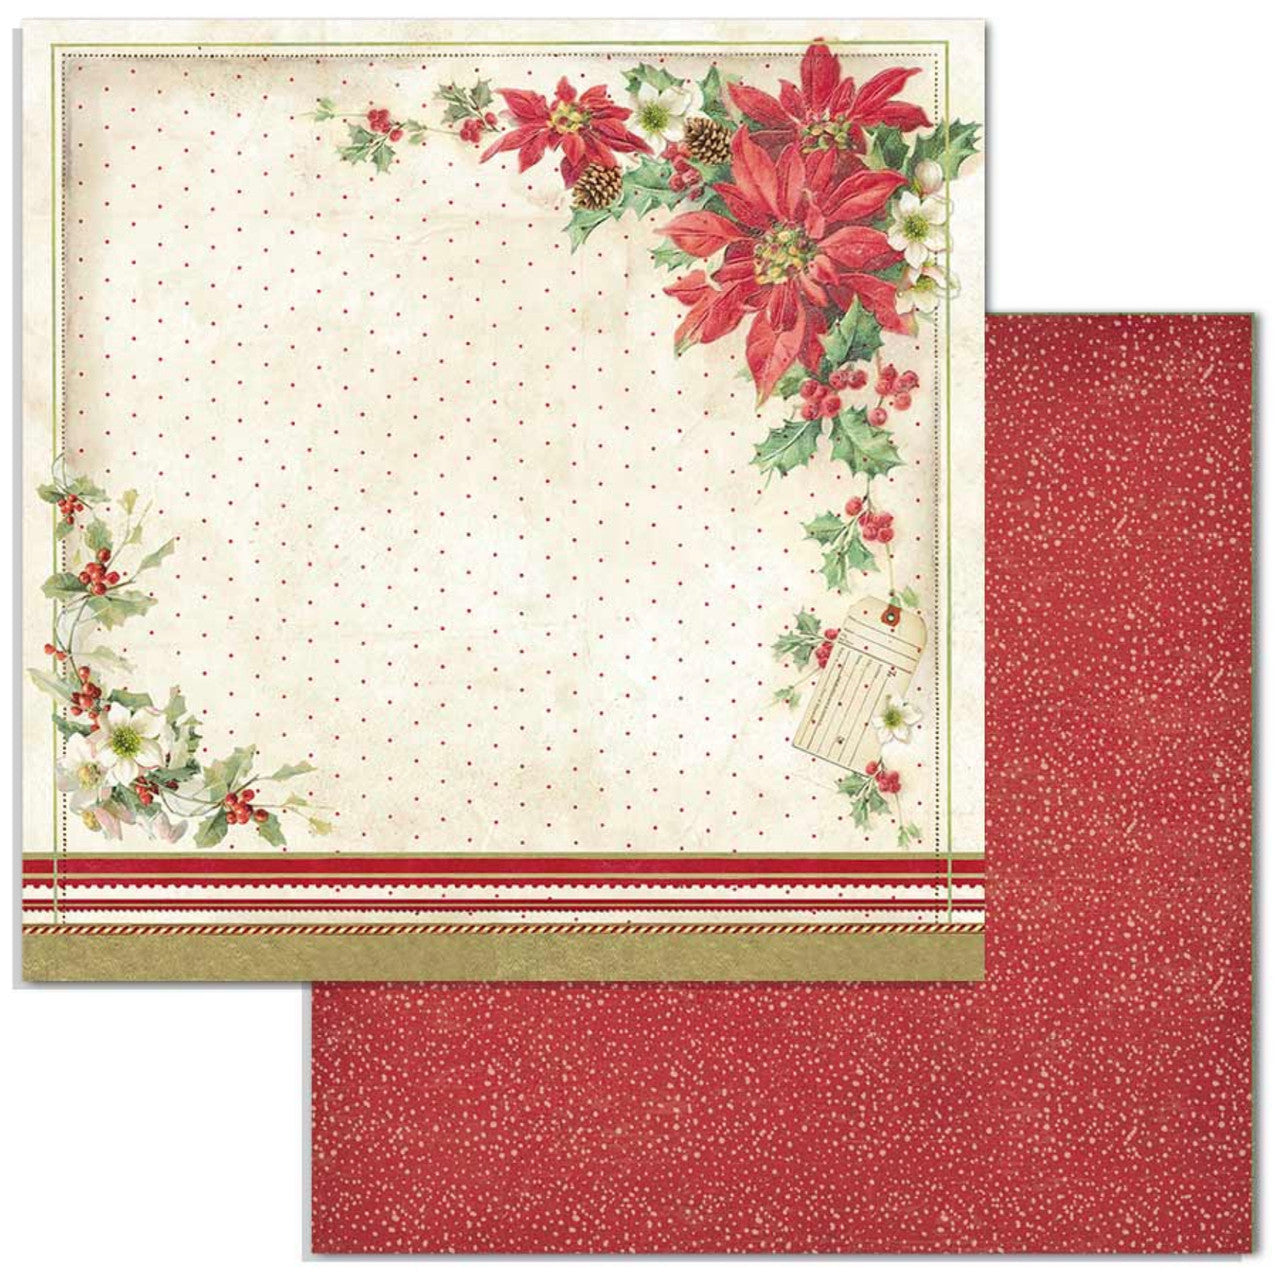 Stamperia Classic Christmas 12” x 12” Paper Pack